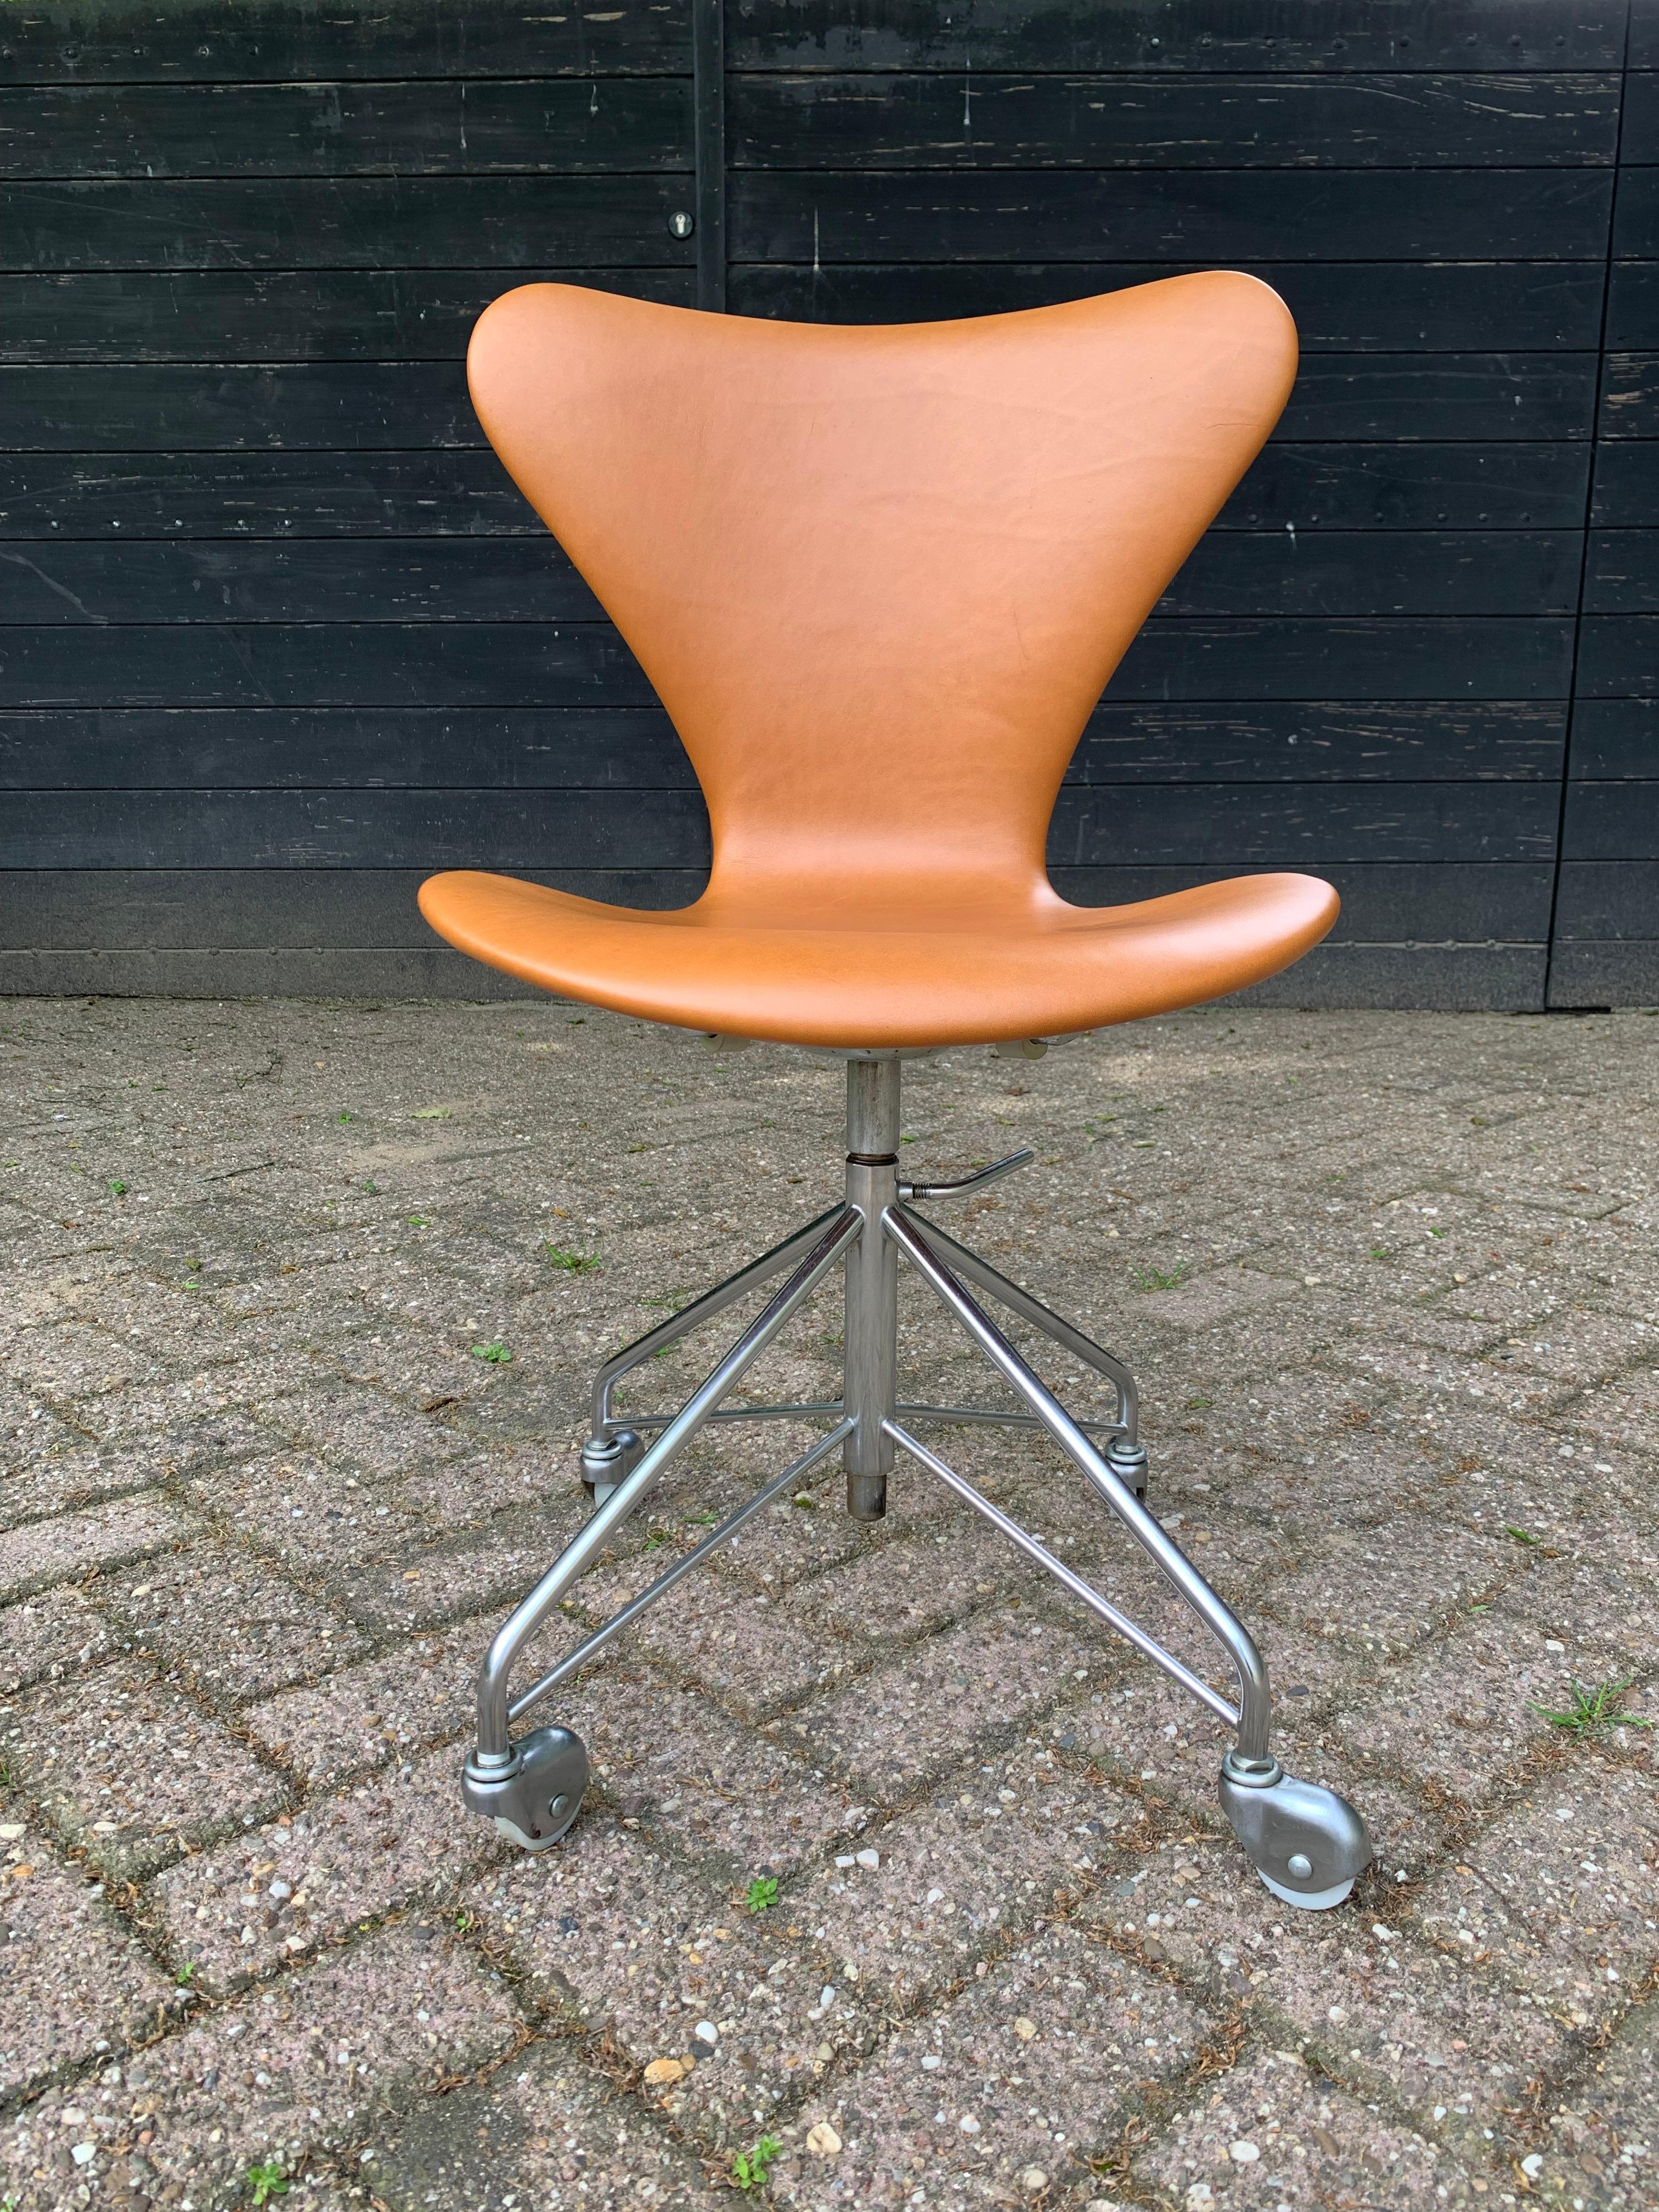 Arne Jacobsen swivel desk chair model 3117 office chair. Original, first series (proven by the metal cap to underside - see image #14) on four-star swivel base with chromed steel feet on casters. Designed by Arne Jacobsen in 1955.

The chair has a